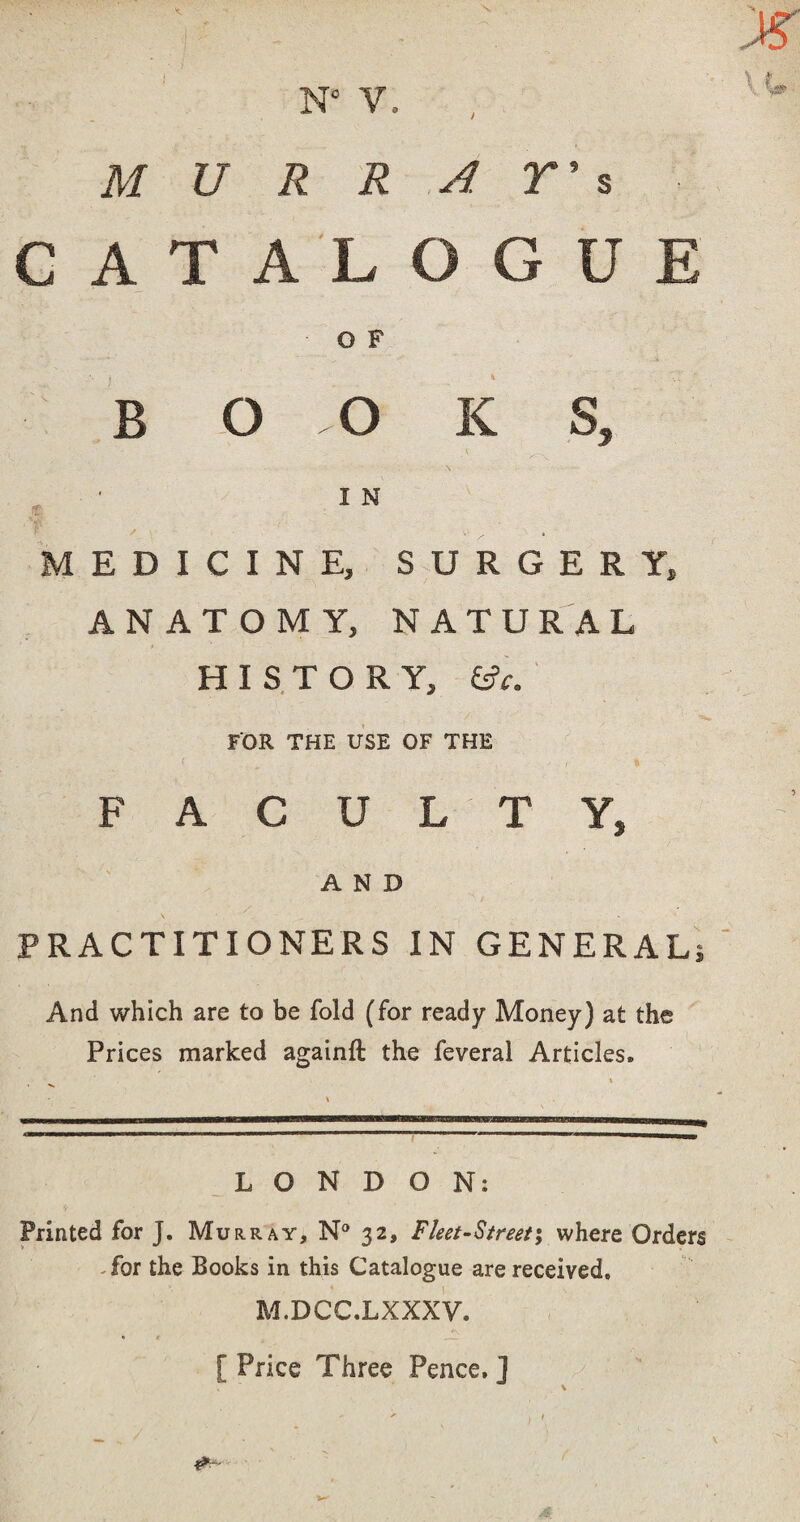 M U R R A r 5 s G A T A L 0 G U E 0 F B 0 0 K V s. ■ I N A / , MEDICINE, SURGERY, ANATOMY, NATURAL HISTORY, i^c.' FOR THE USE OF THE F A C U L T Y, AND PRACTITIONERS IN GENERAL; And which are to be fold (for ready Money) at the Prices marked againft the feveral Articles. ‘  ' I -■■ ■■ ■ U'l _L O N D ON: Printed for J. Murray, N® 32, Fleet-Sireet; where Orders .for the Books in this Catalogue are received, M.DCC.LXXXV. [ Price Three Pence. ]